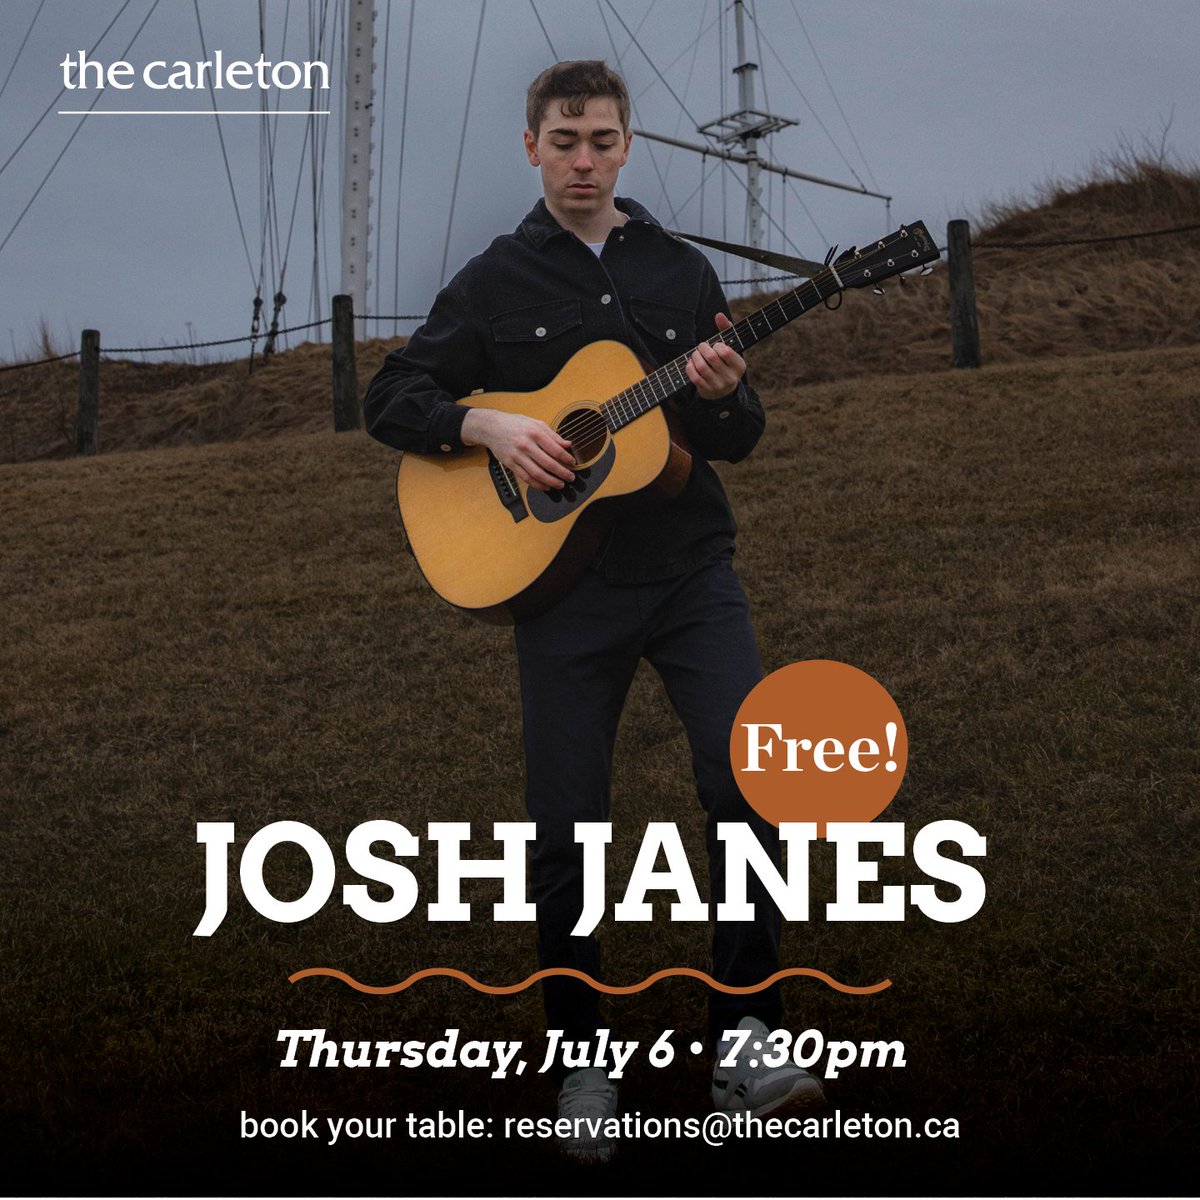 Tonight! Young up-and-coming Halifax singer-songwriter Josh Janes will make his first appearance at The Carleton. He’ll be on stage for three sets, starting at 7:30pm. FREE ADMISSION #joshjanes #liveatthecarleton #downtownhalifax